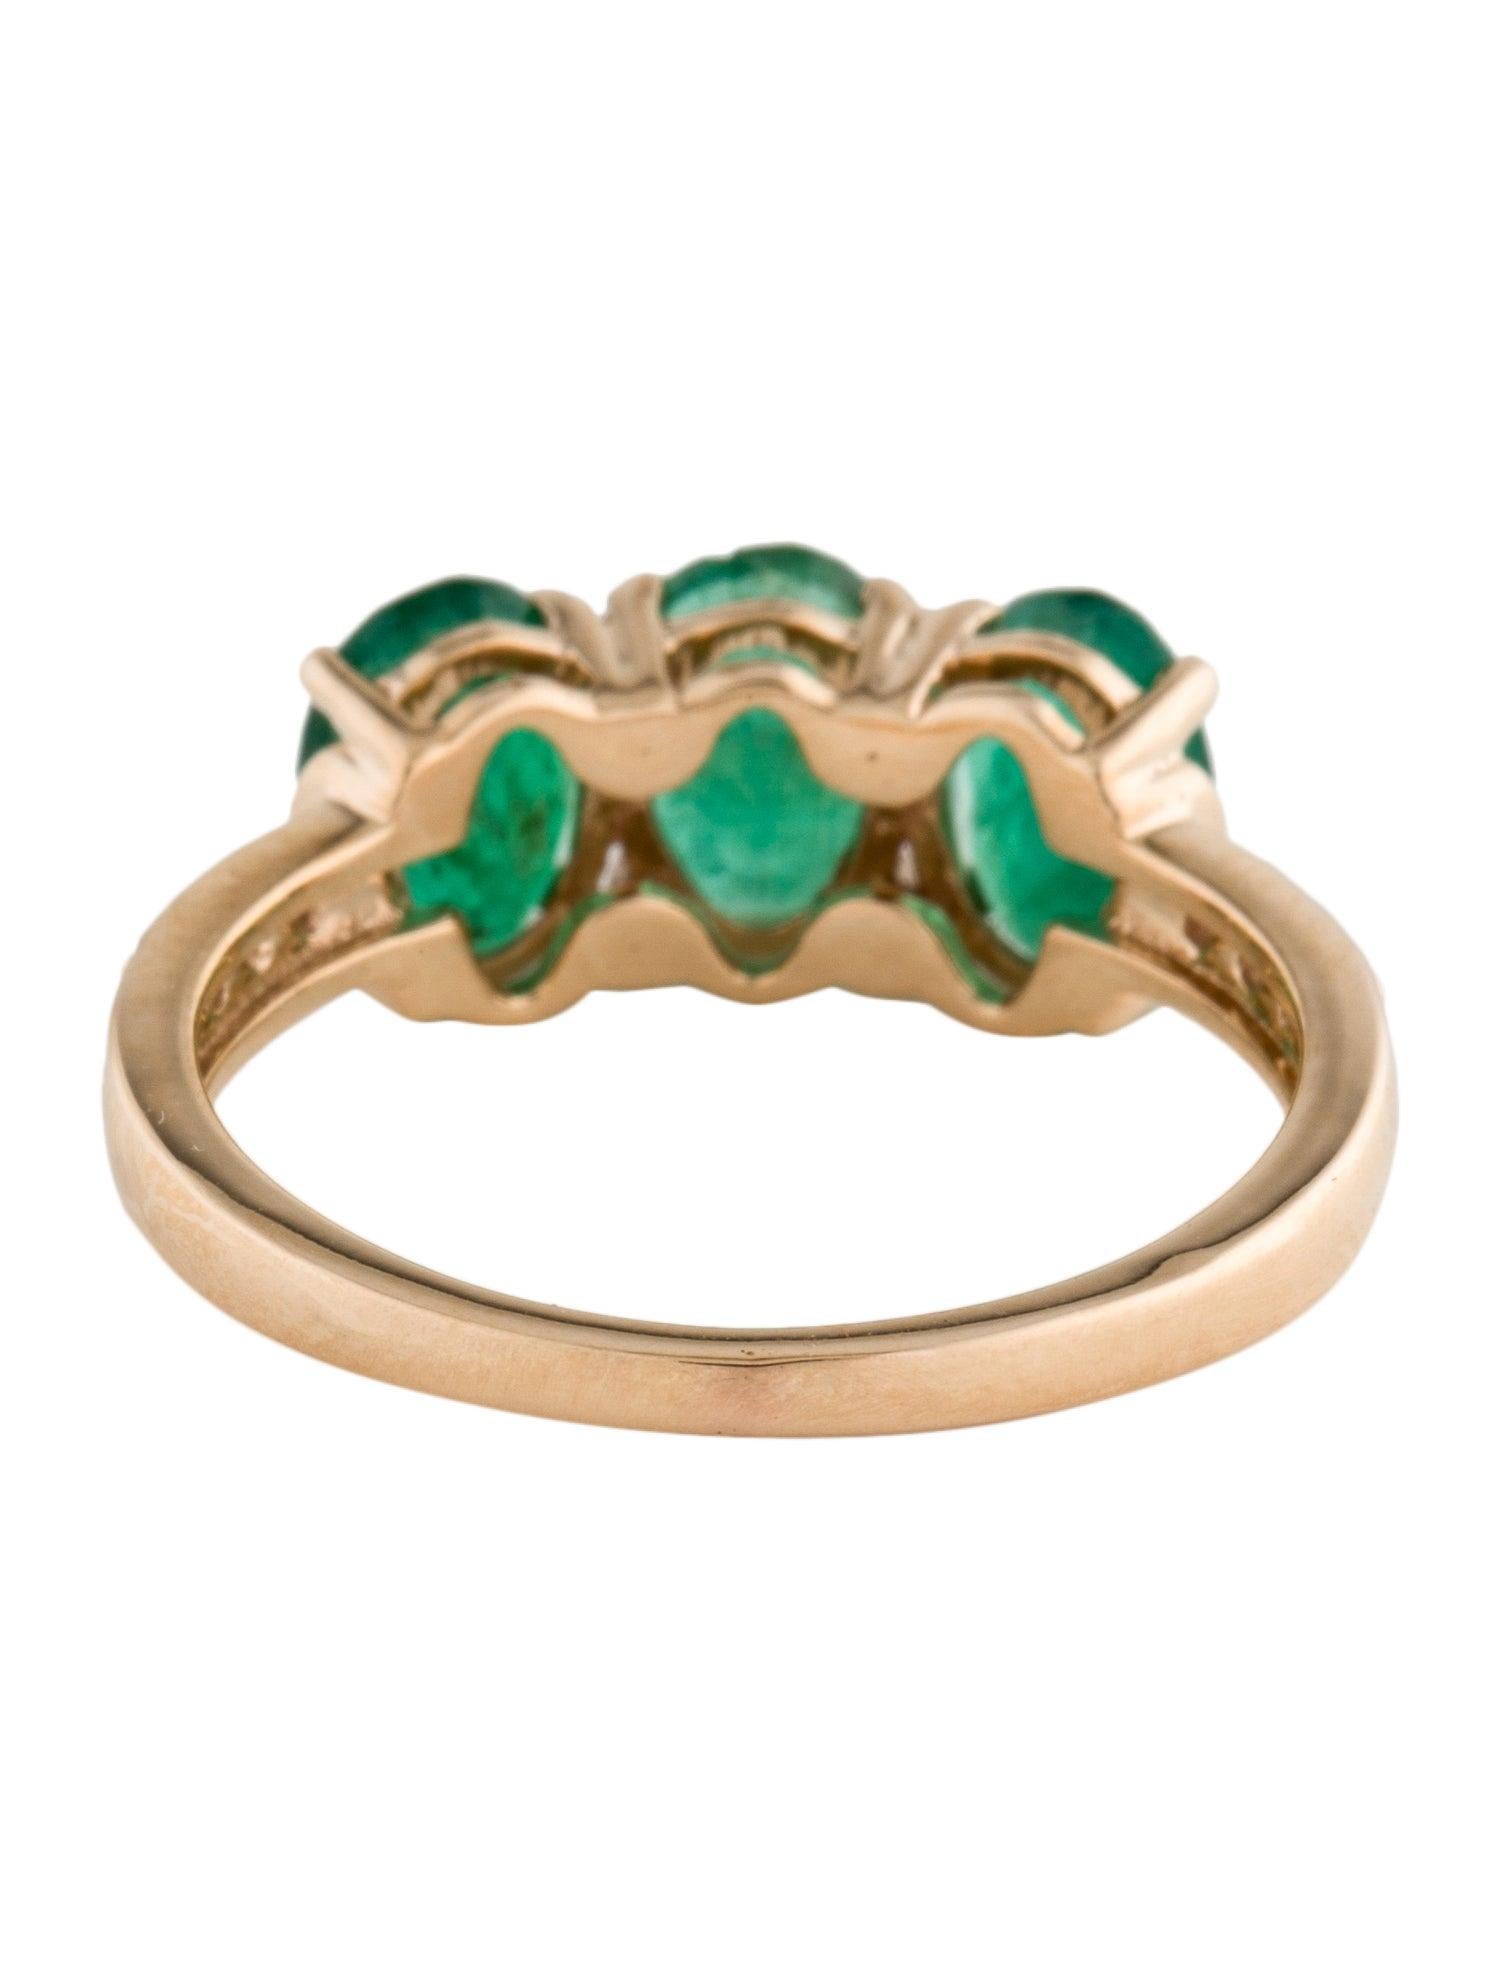 Brilliant Cut Stunning 14K Emerald & Diamond Band Ring 2.10ctw - Size 6.75 - Timeless Luxury For Sale